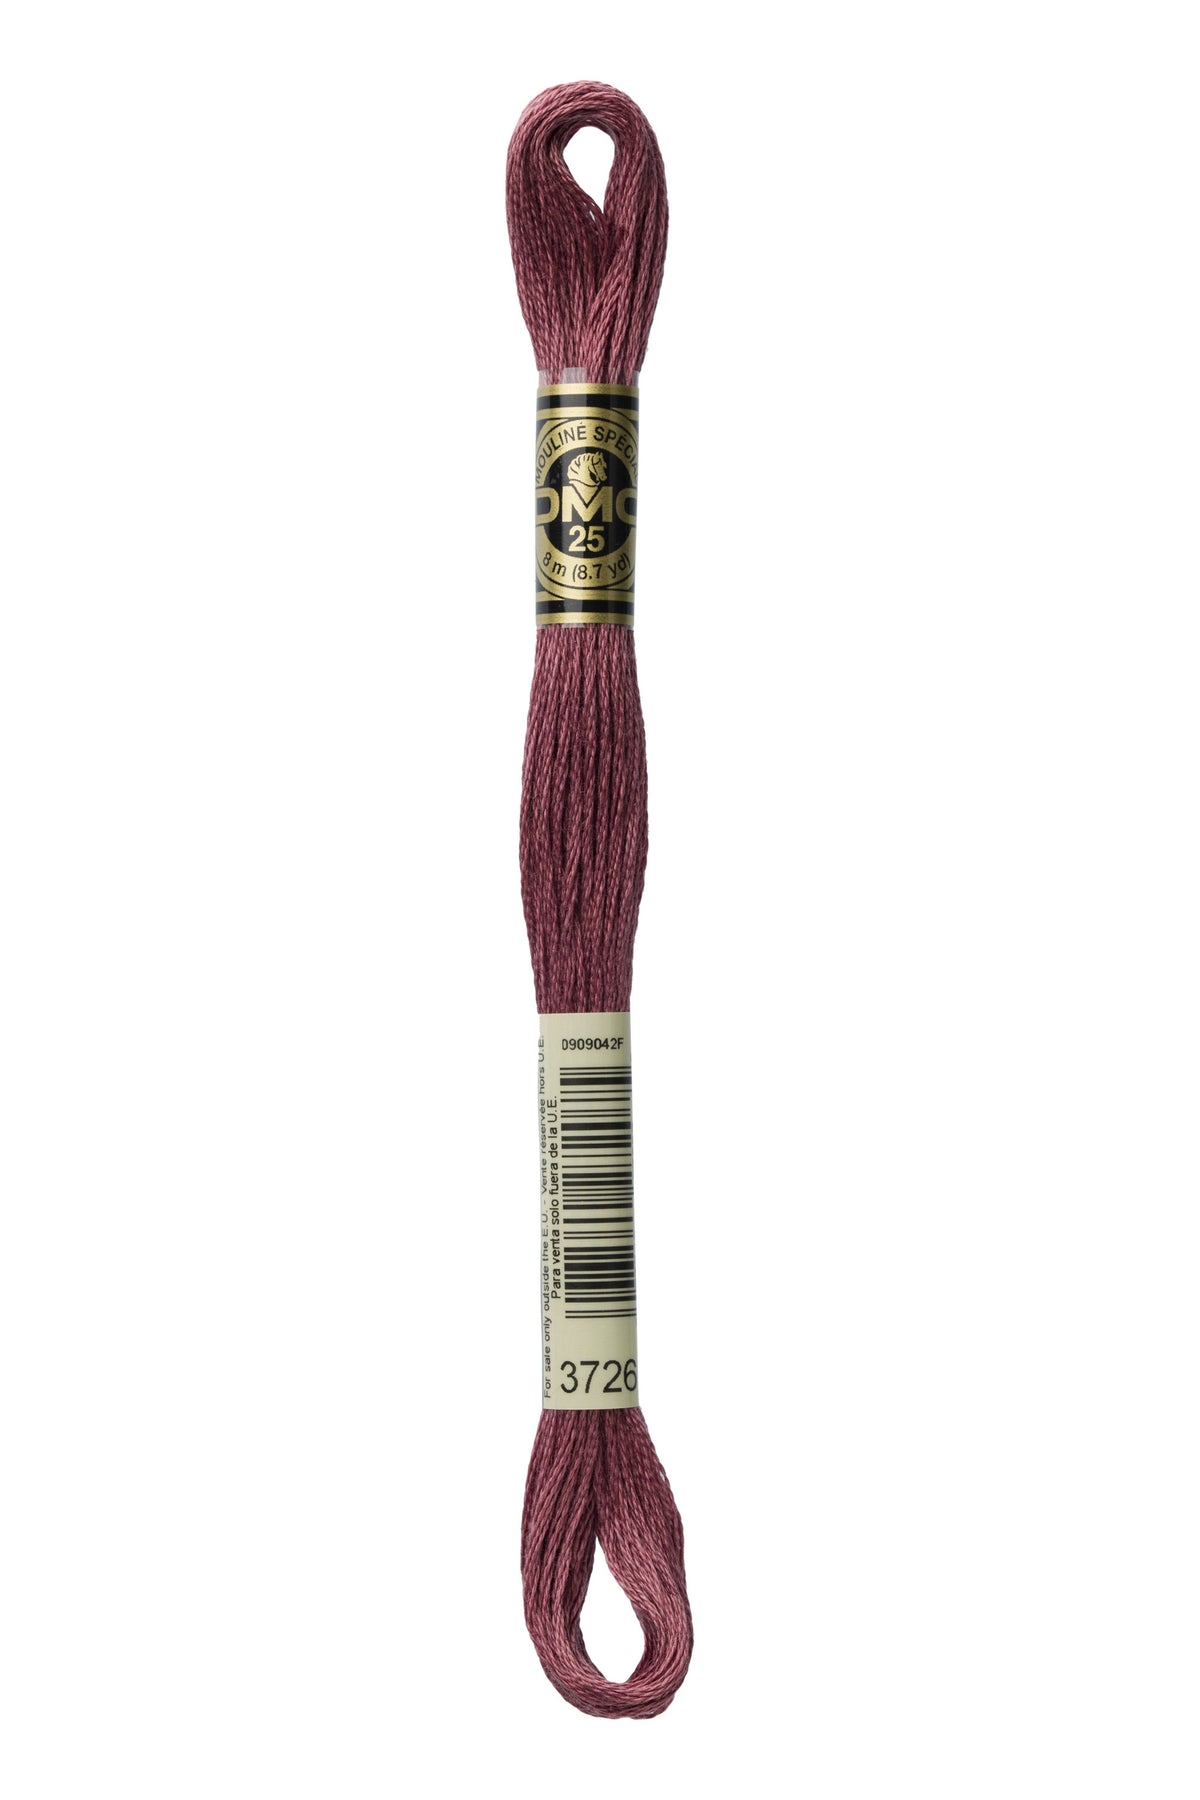 Cotton Six Stranded Embroidery Floss | DMC 3689-3855